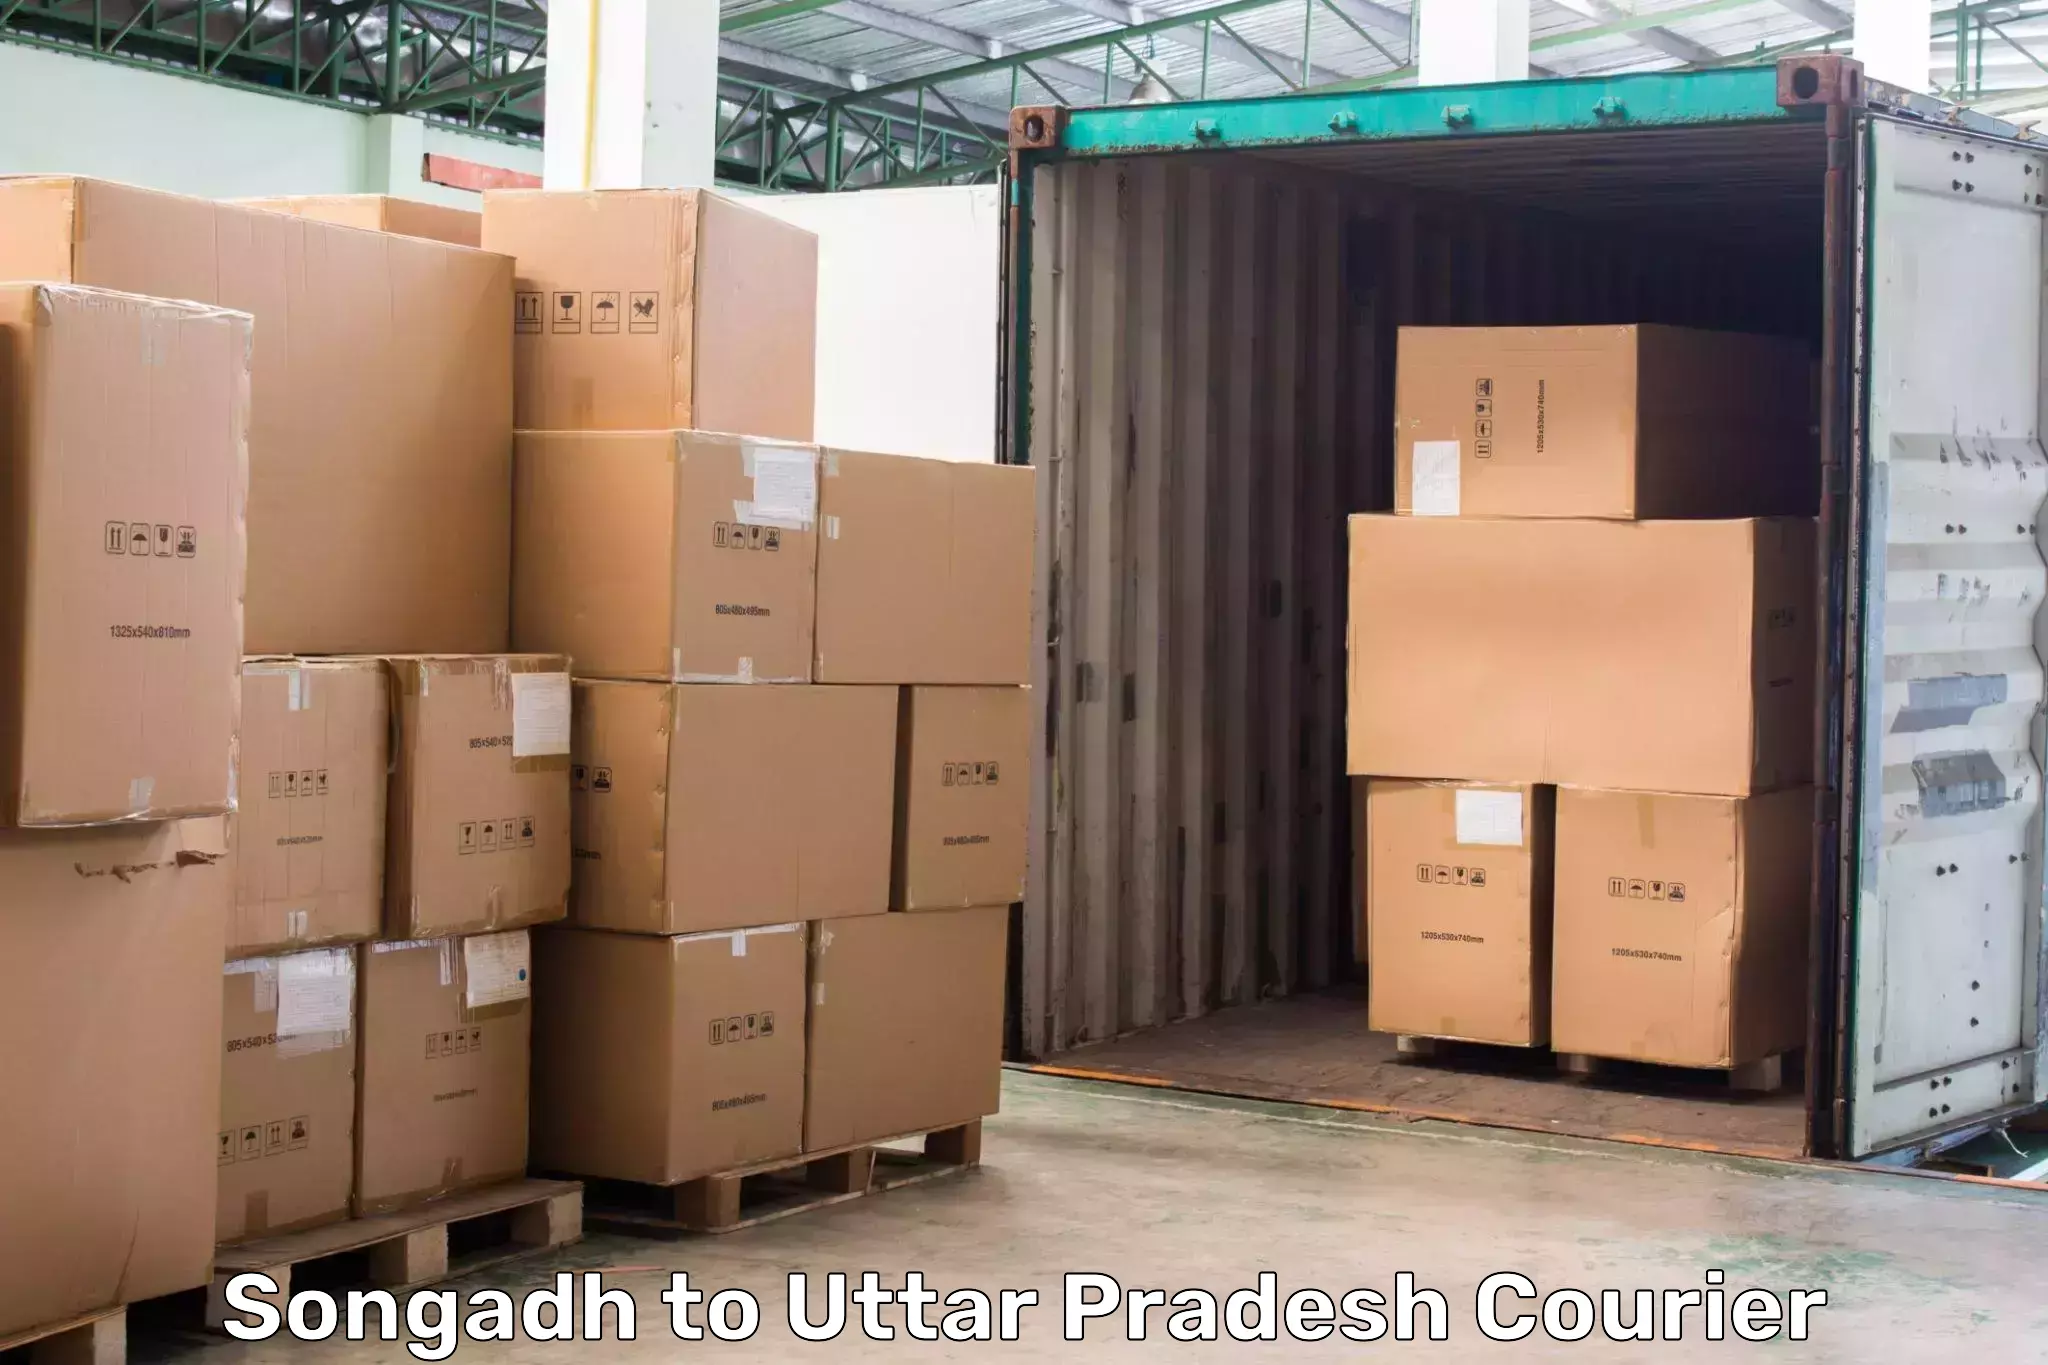 Dynamic courier operations Songadh to Aligarh